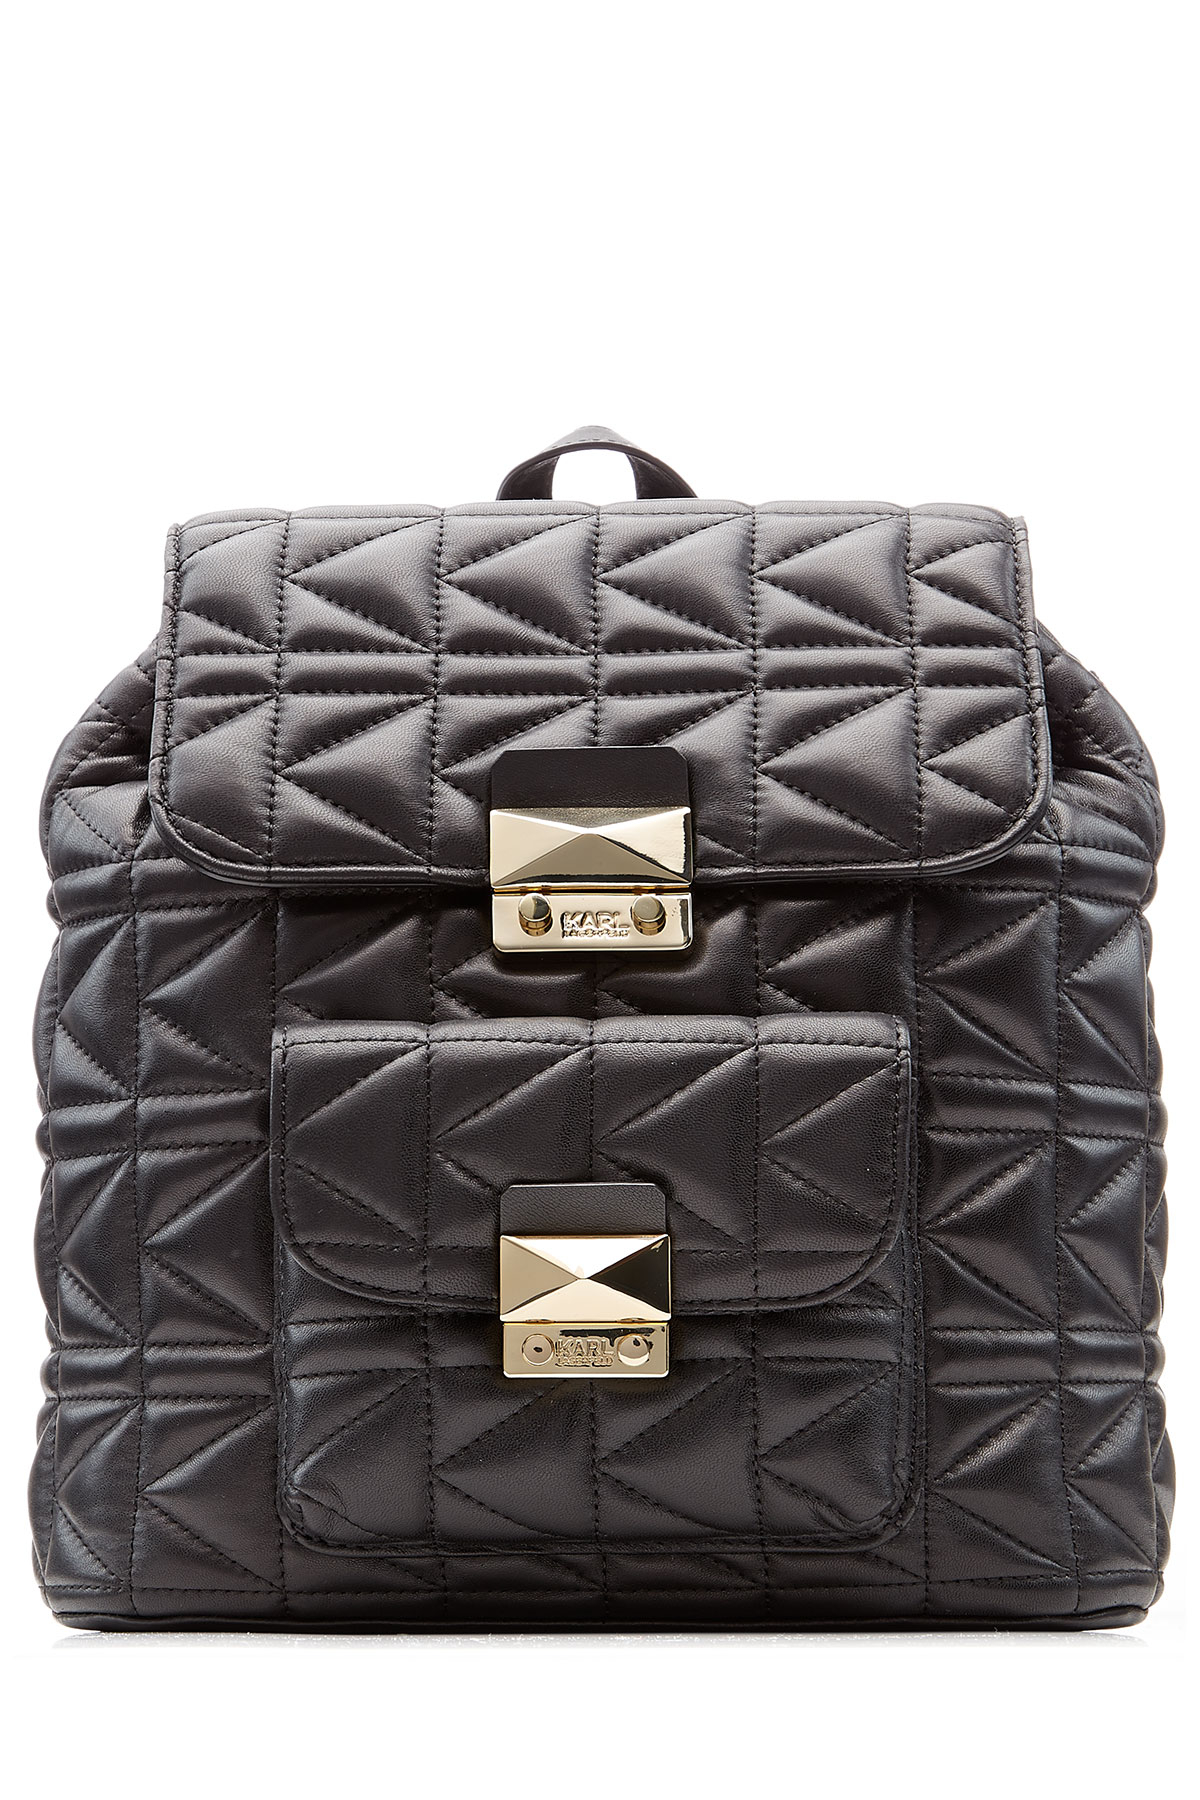 Lyst - Karl lagerfeld Quilted Leather Backpack in Black